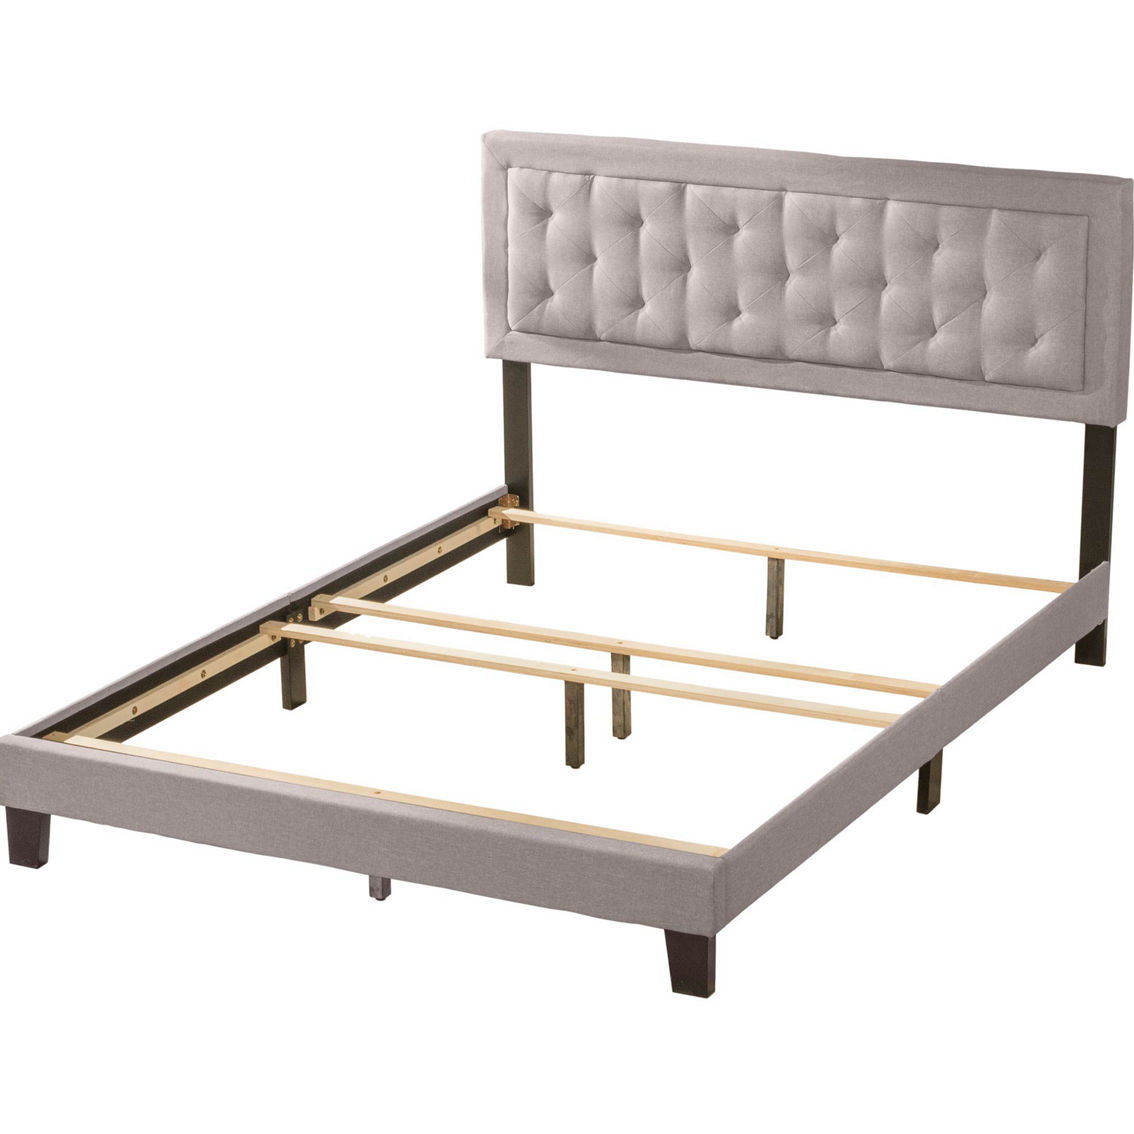 Hillsdale La Croix Bed in One - Image 6 of 6